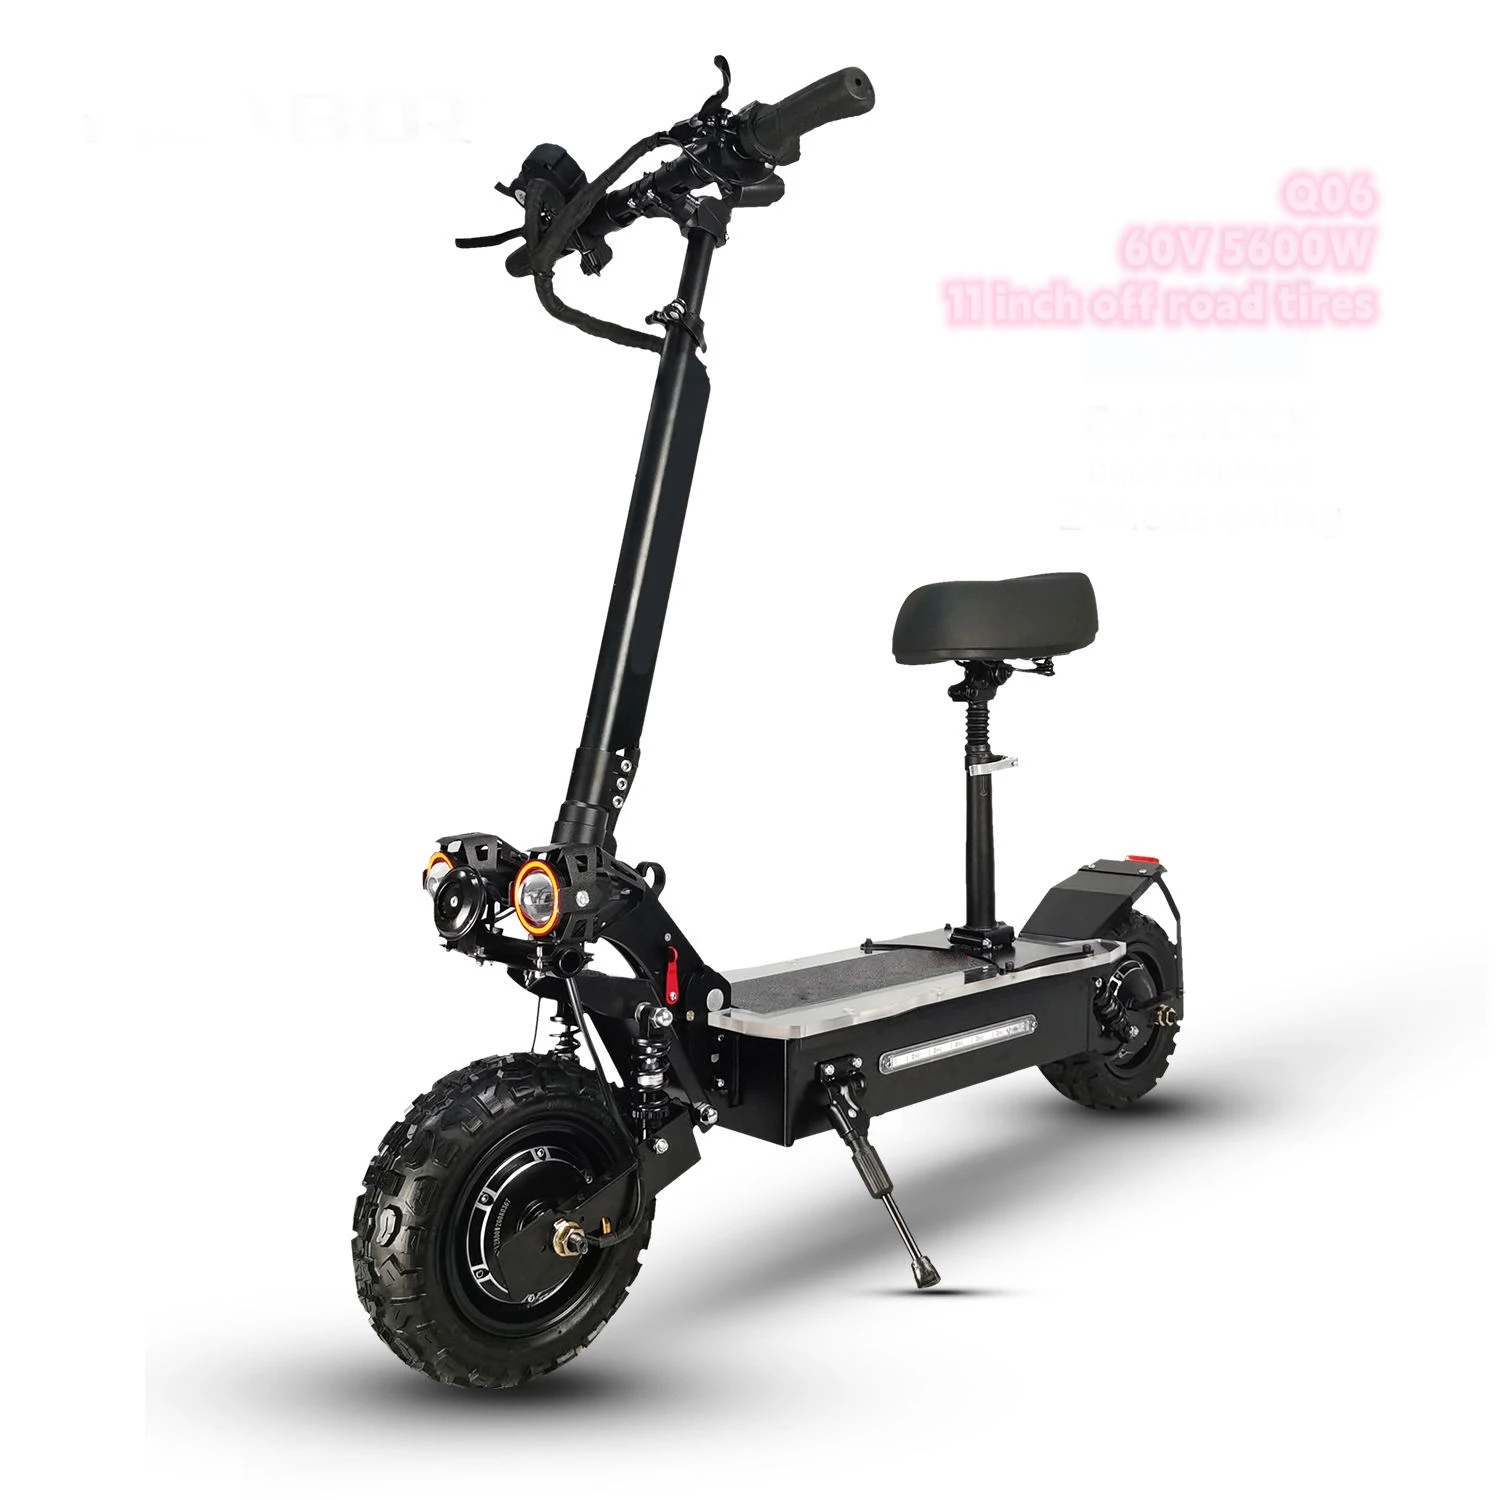 

hot style ranges 60-80km 60v 27ah 11 inch off road tires 5600w dual motor electric scooter 60v dual motor with seat for adults